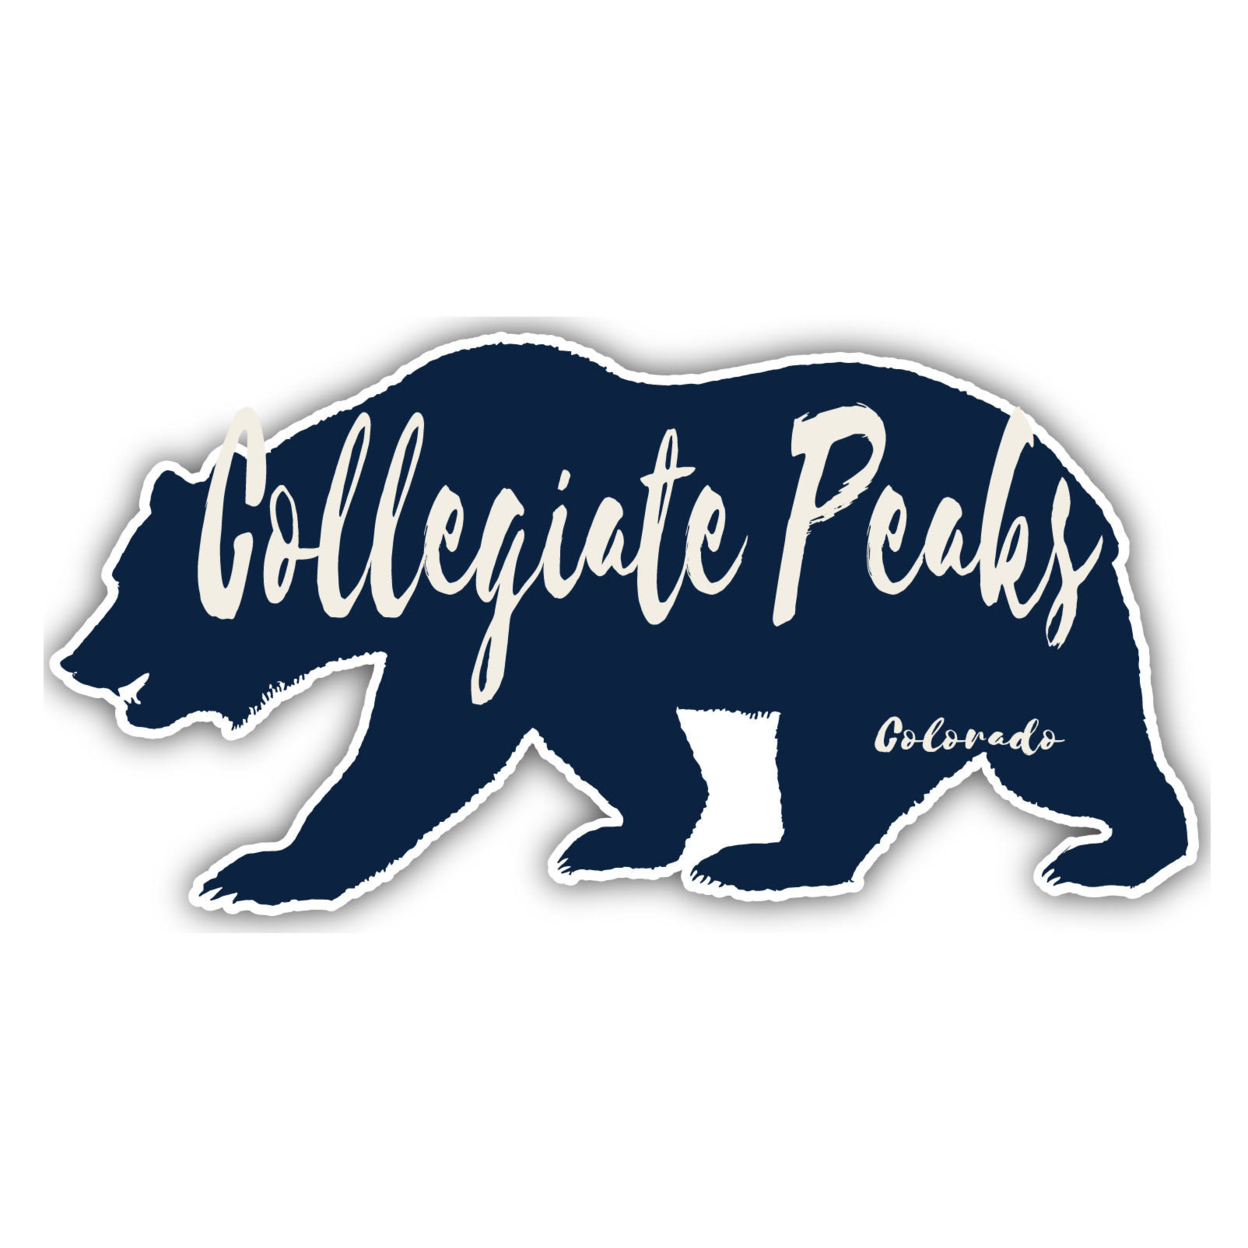 Collegiate Peaks Colorado Souvenir Decorative Stickers (Choose Theme And Size) - 4-Pack, 8-Inch, Camp Life